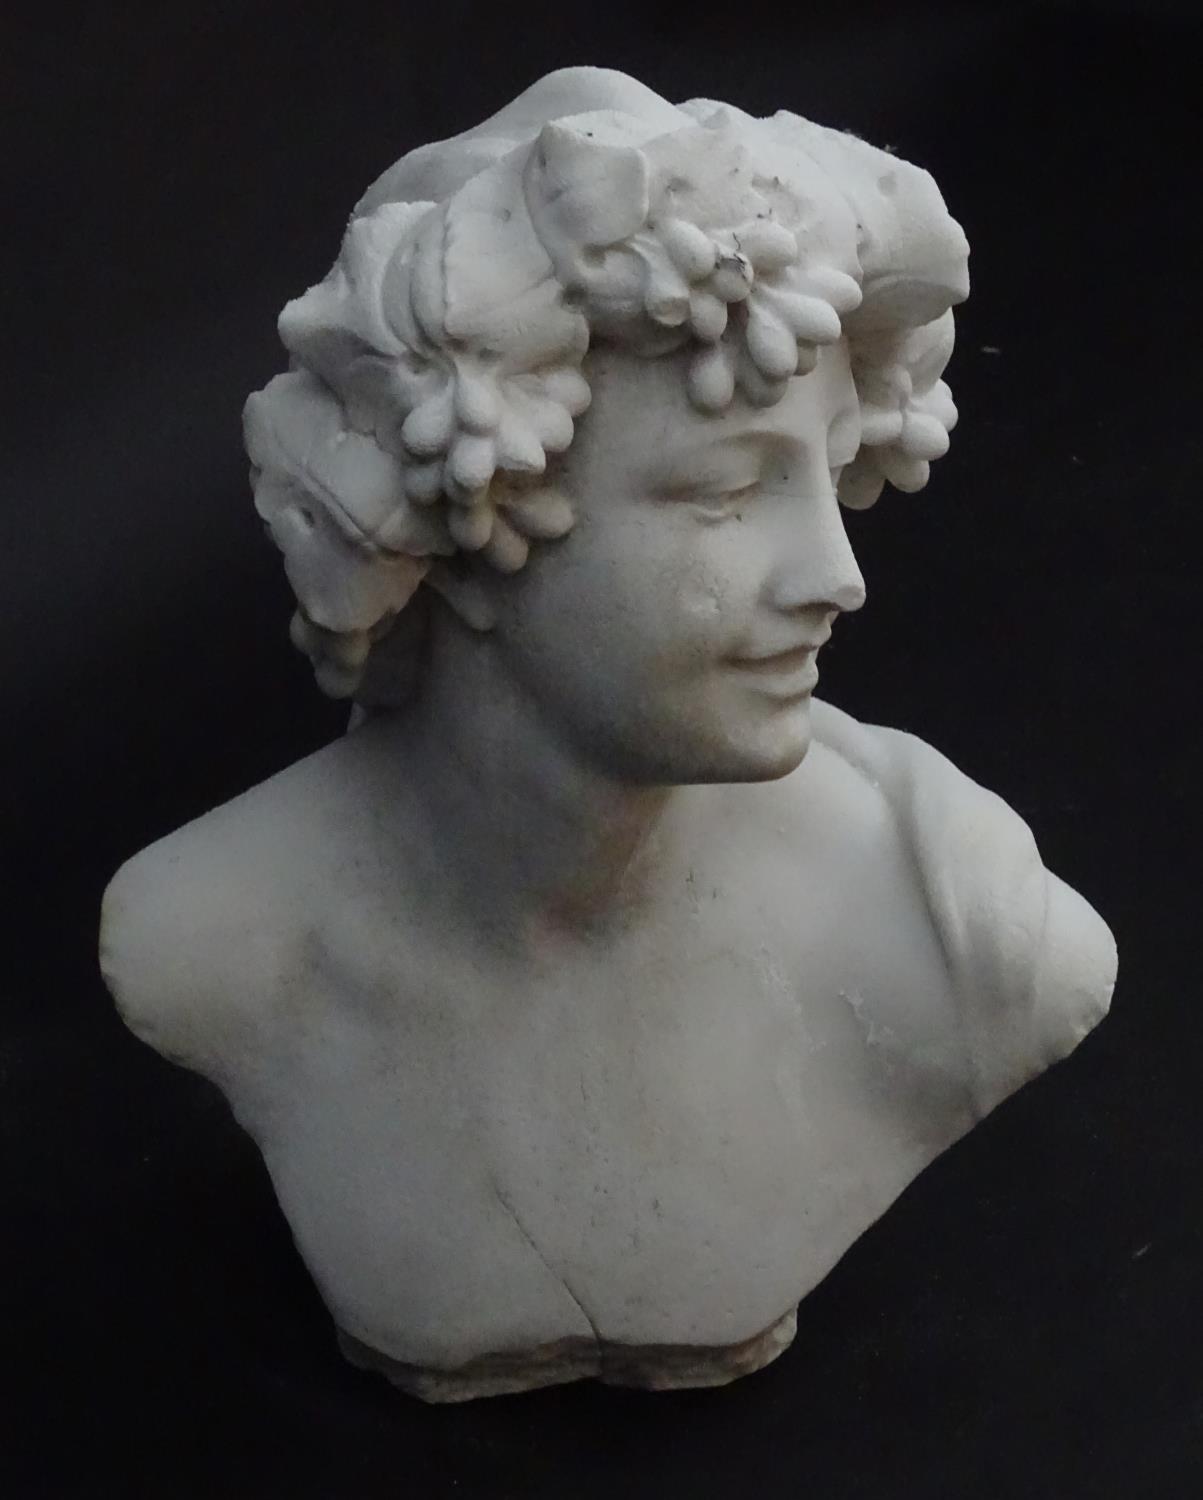 A reconstituted marble sculpture: bust of Bacchus, Roman God of Wine, Agriculture and fertility. - Image 8 of 18